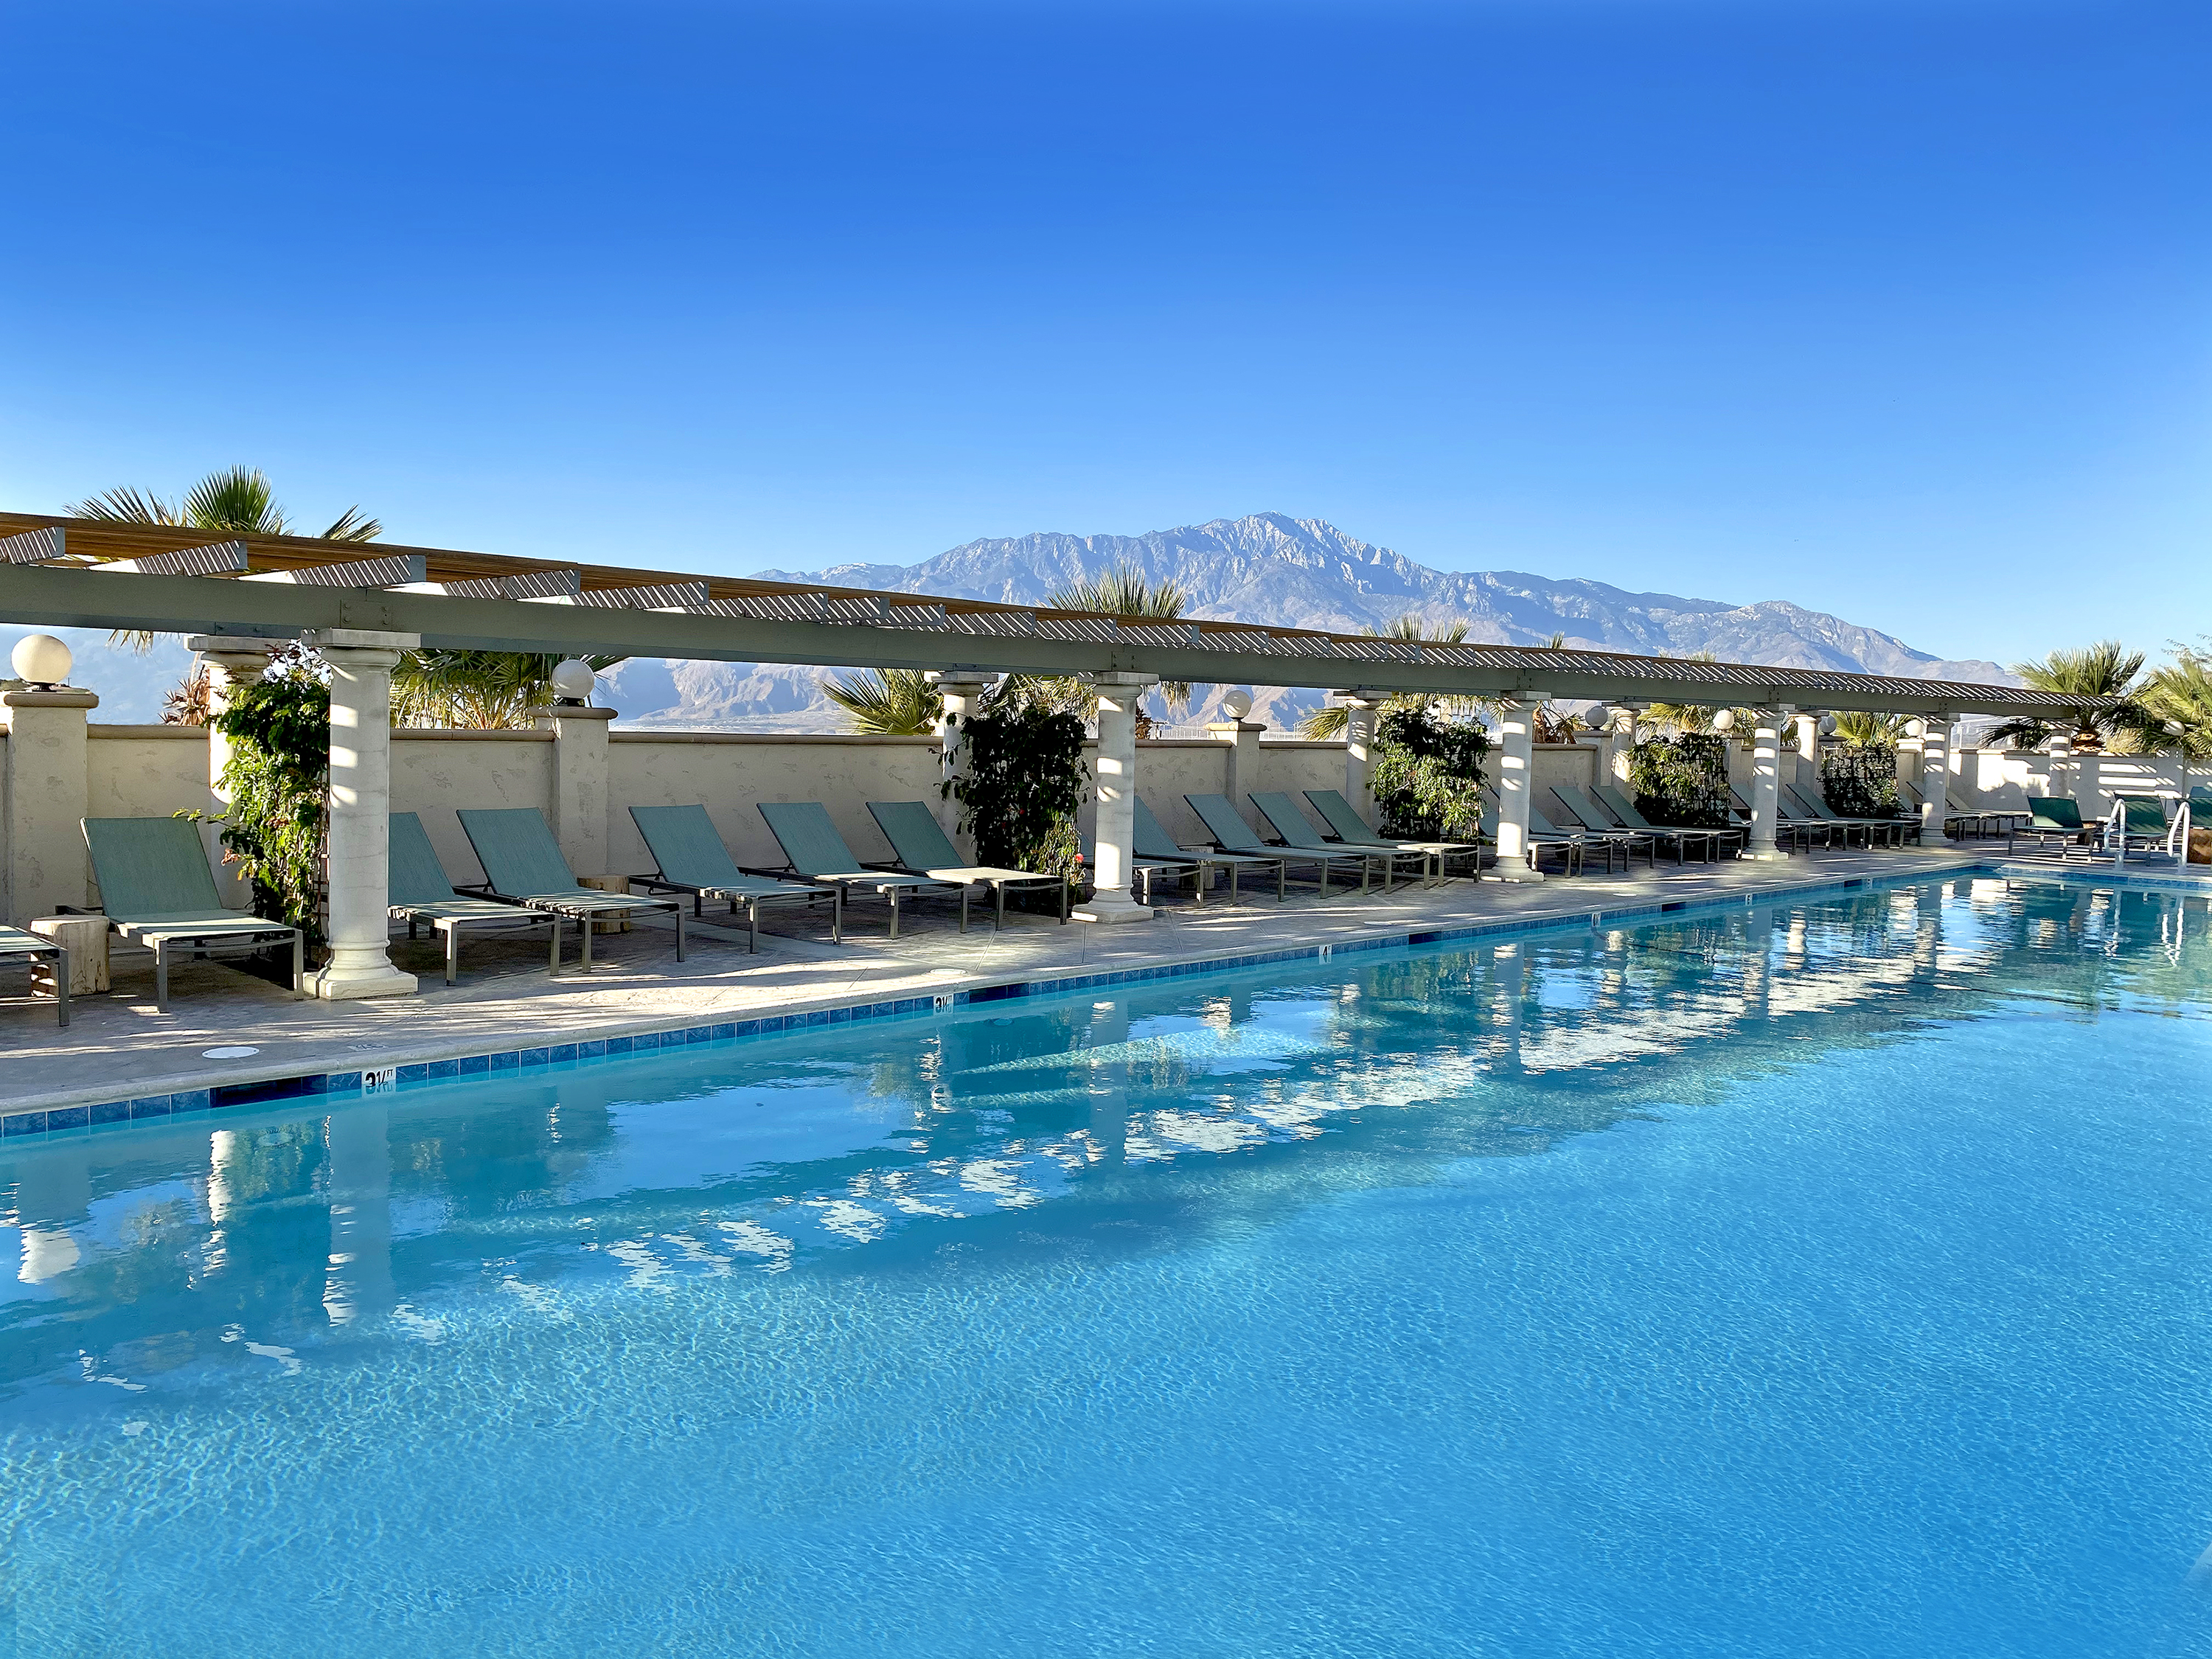 A 100-foot mineral-water pool at the Azure Palm Springs